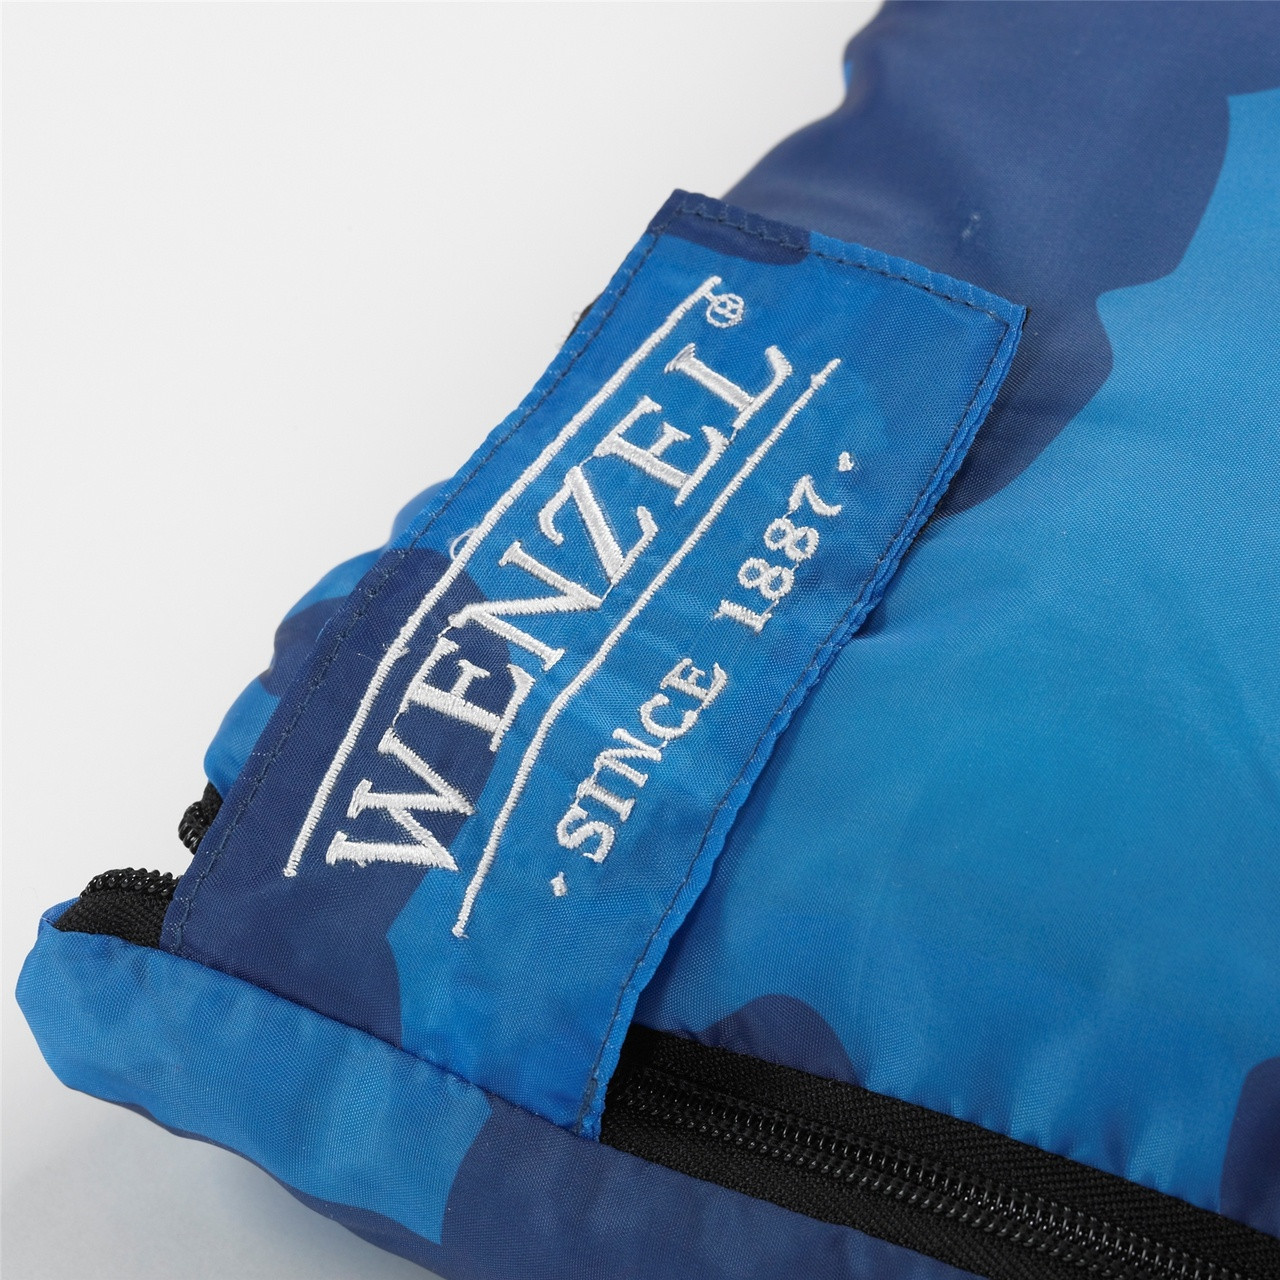 Close up view of the Velcro latch over the zipper on the Wenzel Kids Blue Moose 40 degree sleeping bag